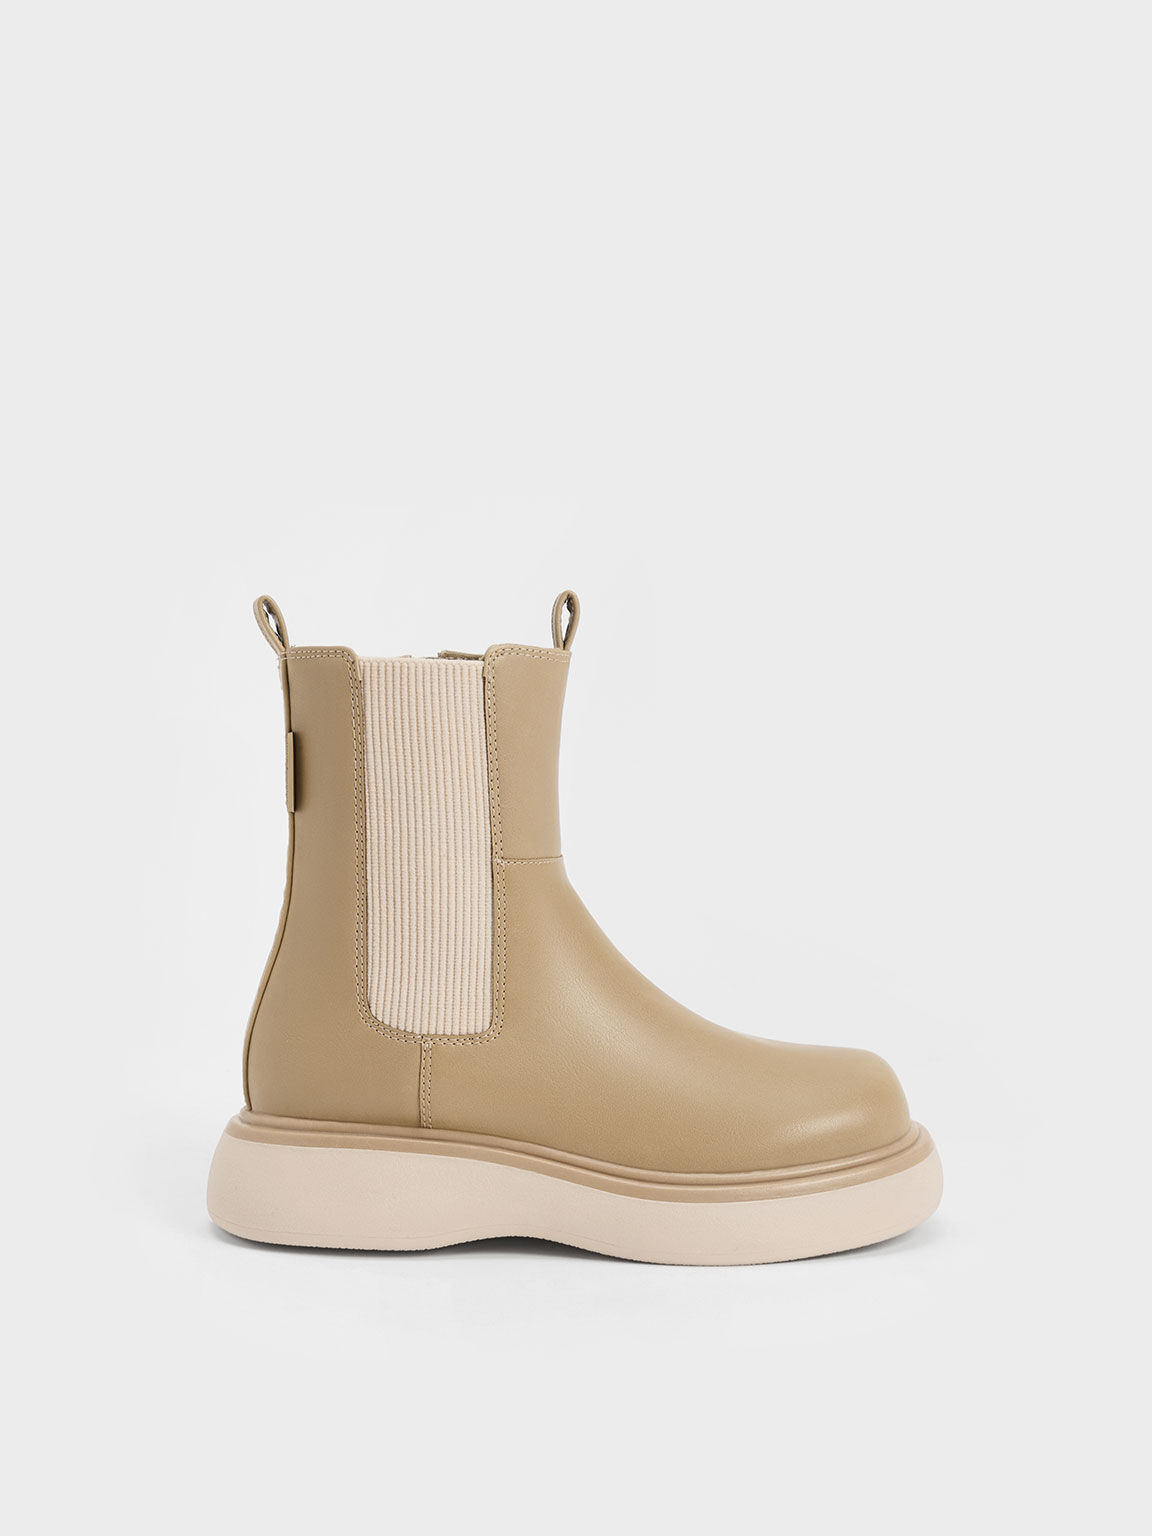 Girls- Double Pull Tab Chelsea Boots, Sand, hi-res